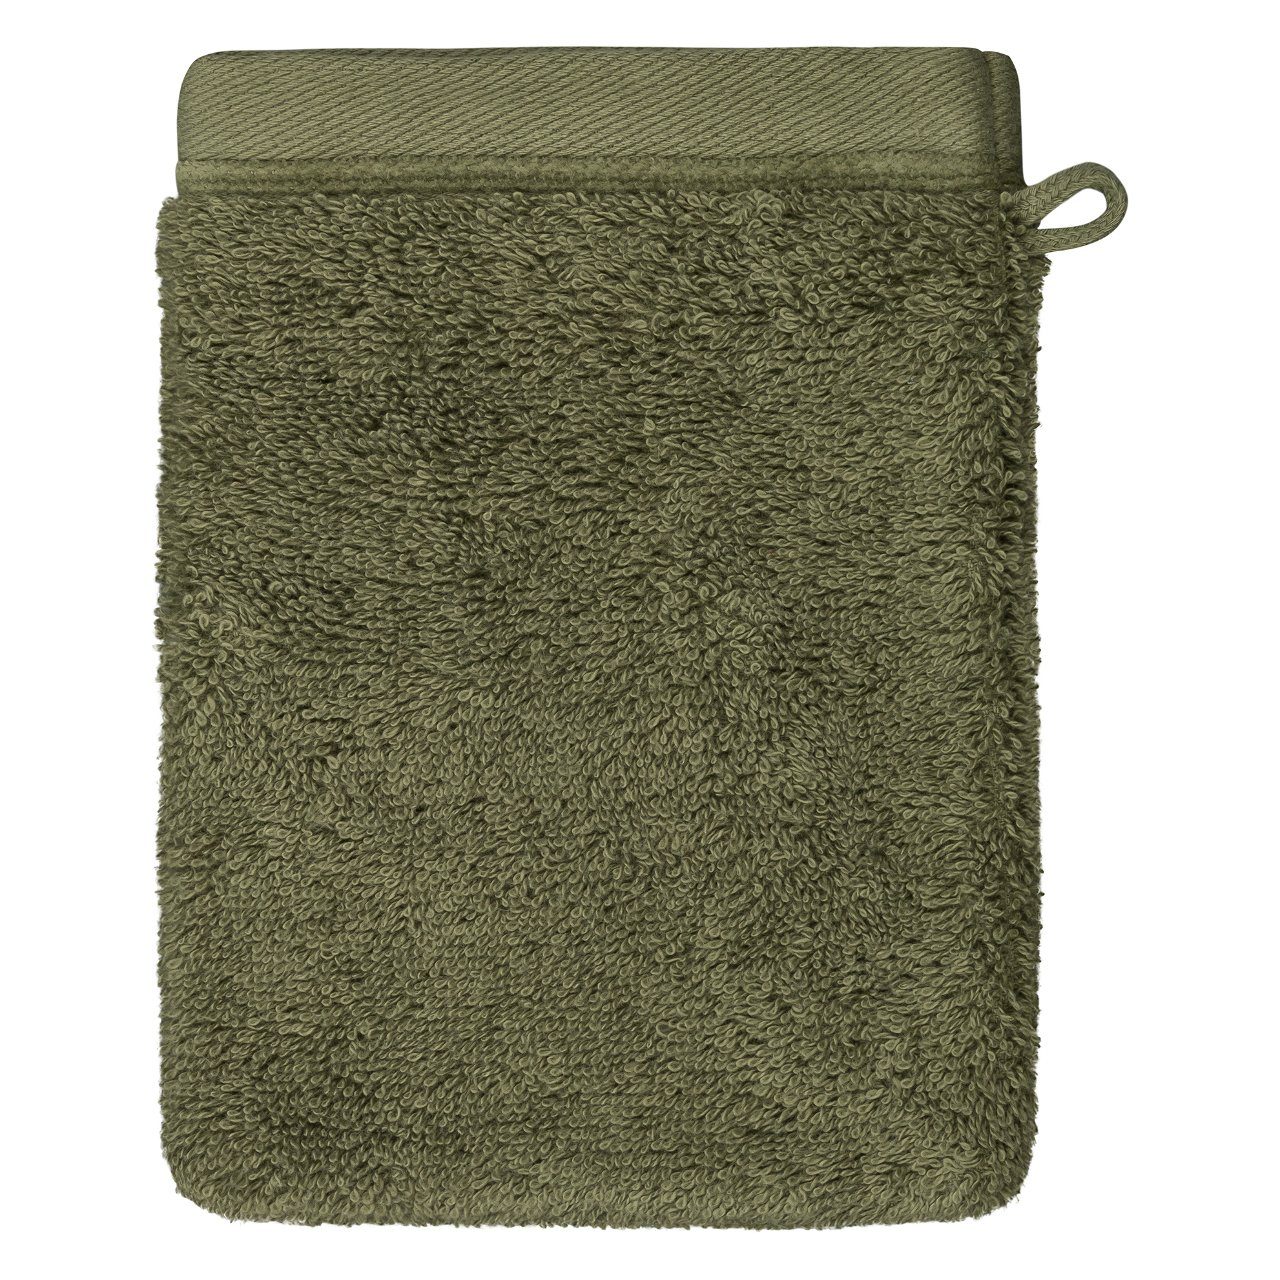 Home Waschhandschuh Blank (1-tlg) Waschlappen "Classic" Olive